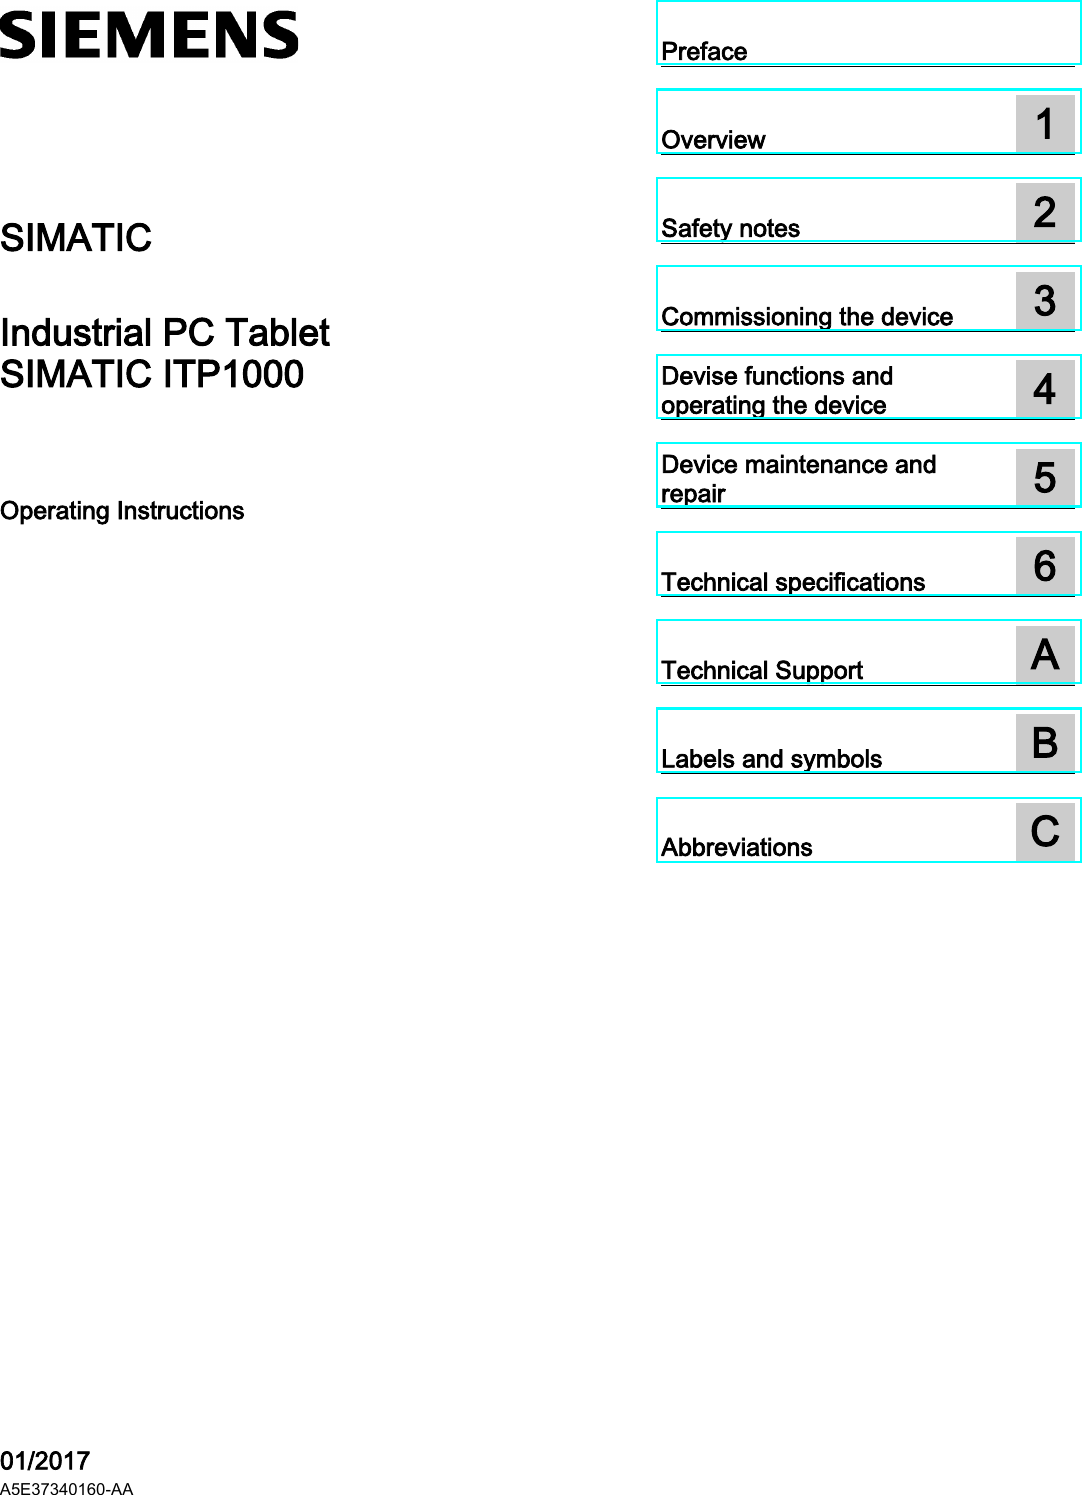     SIMATIC Industrial PC Tablet SIMATIC ITP1000 Operating Instructions    01/2017 A5E37340160-AA  Preface    Overview  1  Safety notes  2  Commissioning the device  3  Devise functions and operating the device  4  Device maintenance and repair  5  Technical specifications  6  Technical Support  A  Labels and symbols  B  Abbreviations  C  